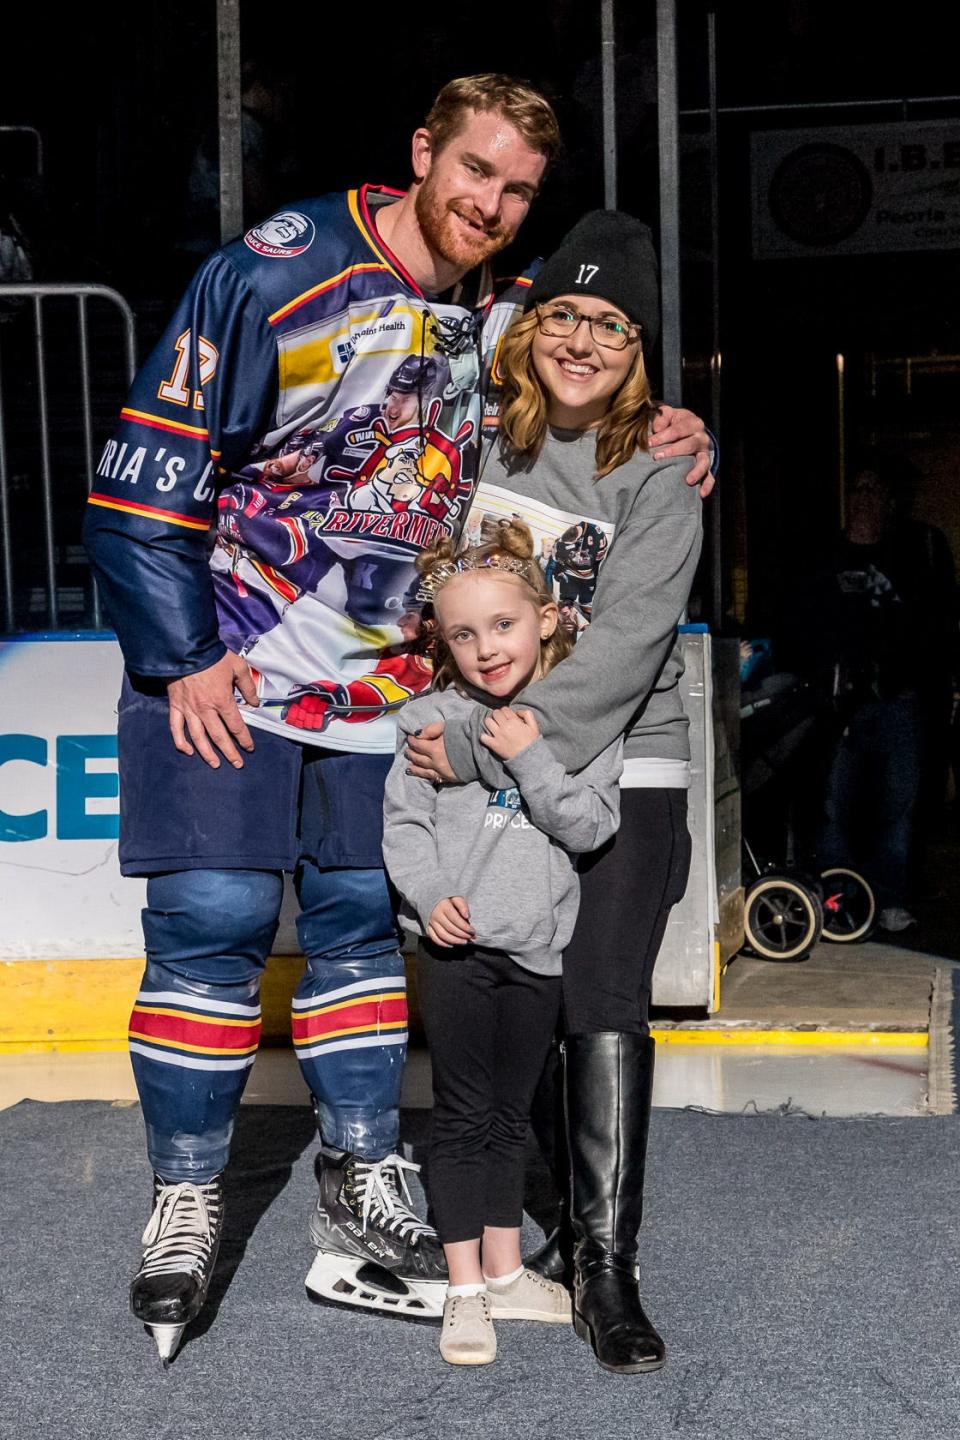 Peoria Rivermen captain Alec Hagaman and his wife, Emily, and daughter, Adley after a pre-game ceremony in which the longtime Rivermen star announced he will retire after the 2022-23 playoffs.